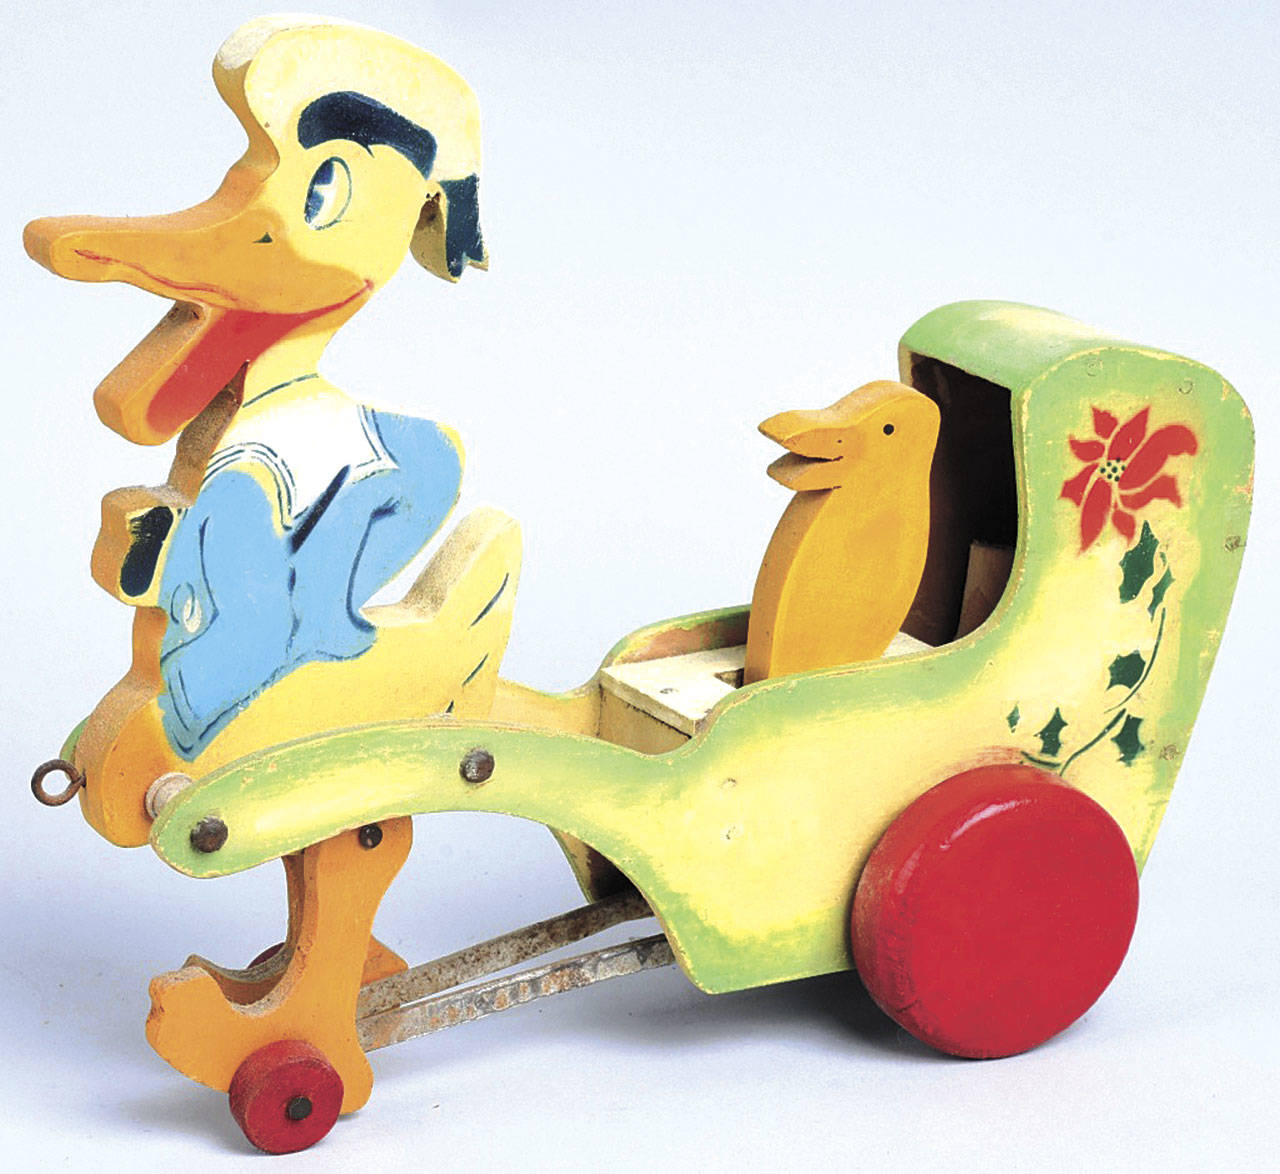 Collectors like unique examples, even those that are mysteries. This wooden pull toy, a copy of Donald Duck, was possibly made in China in the 1930s. It sold at a Milestone auction in Willoughby, Ohio, for $4,200. (Cowles Syndicate Inc.)